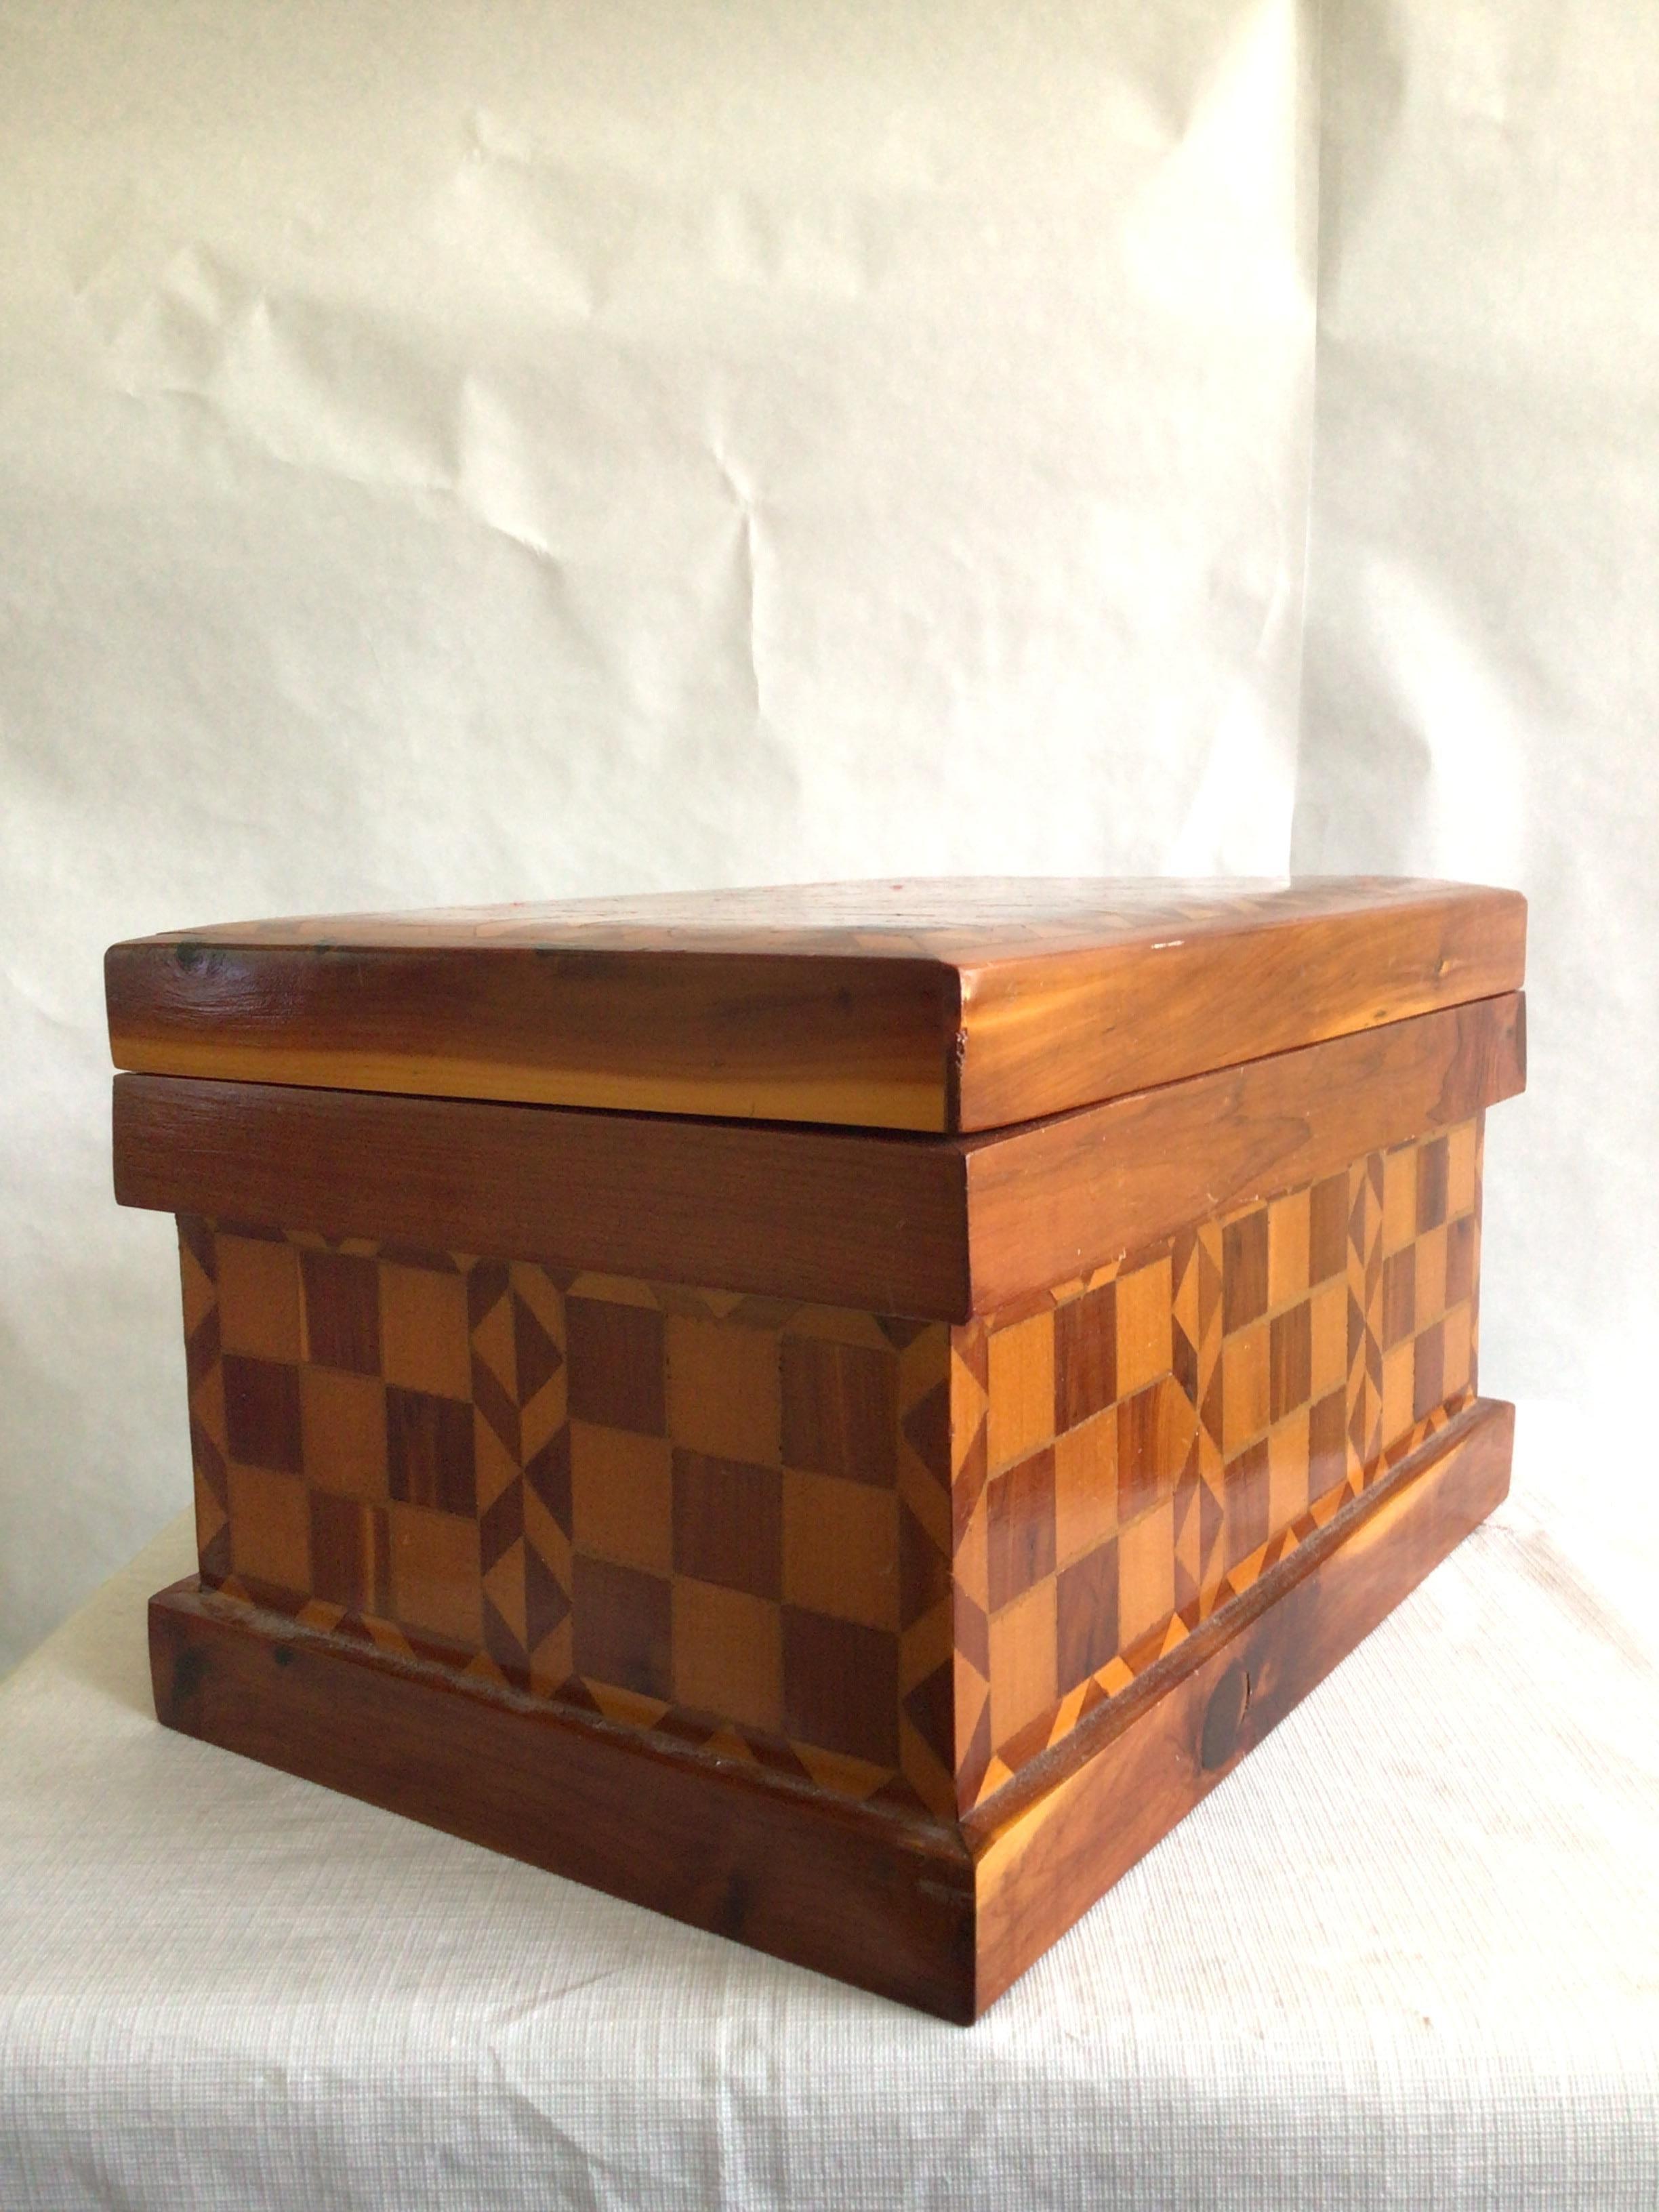 Hand-Crafted 1940s Handmade Folk Art Checkered Inlayed Box For Sale